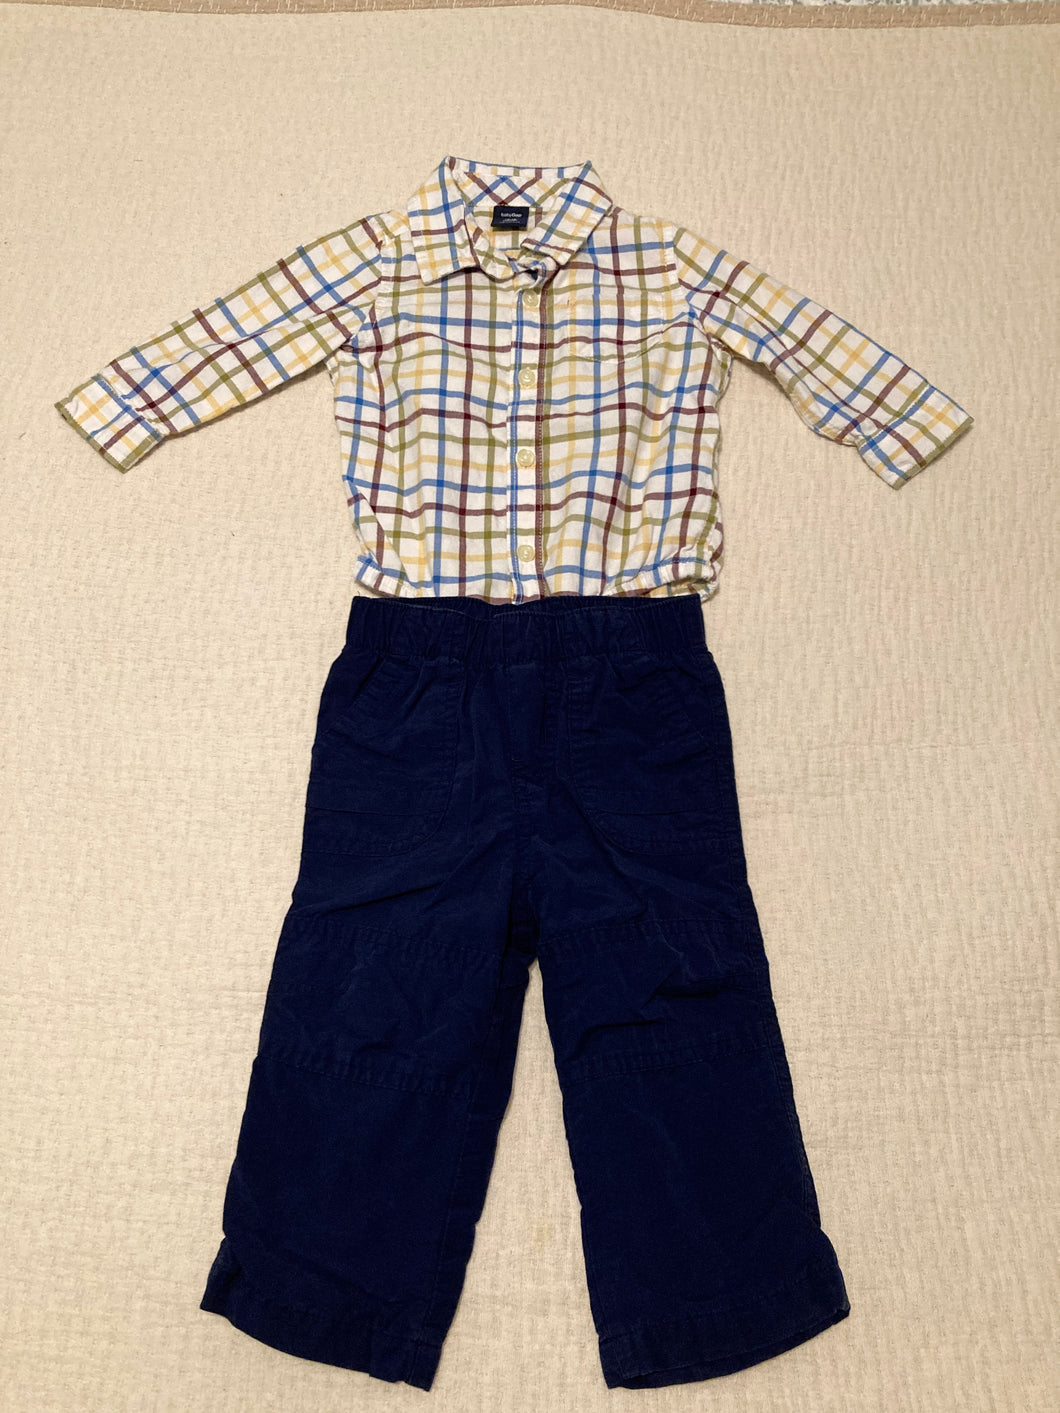 Boys Spring Outfit 12 Months 12 months